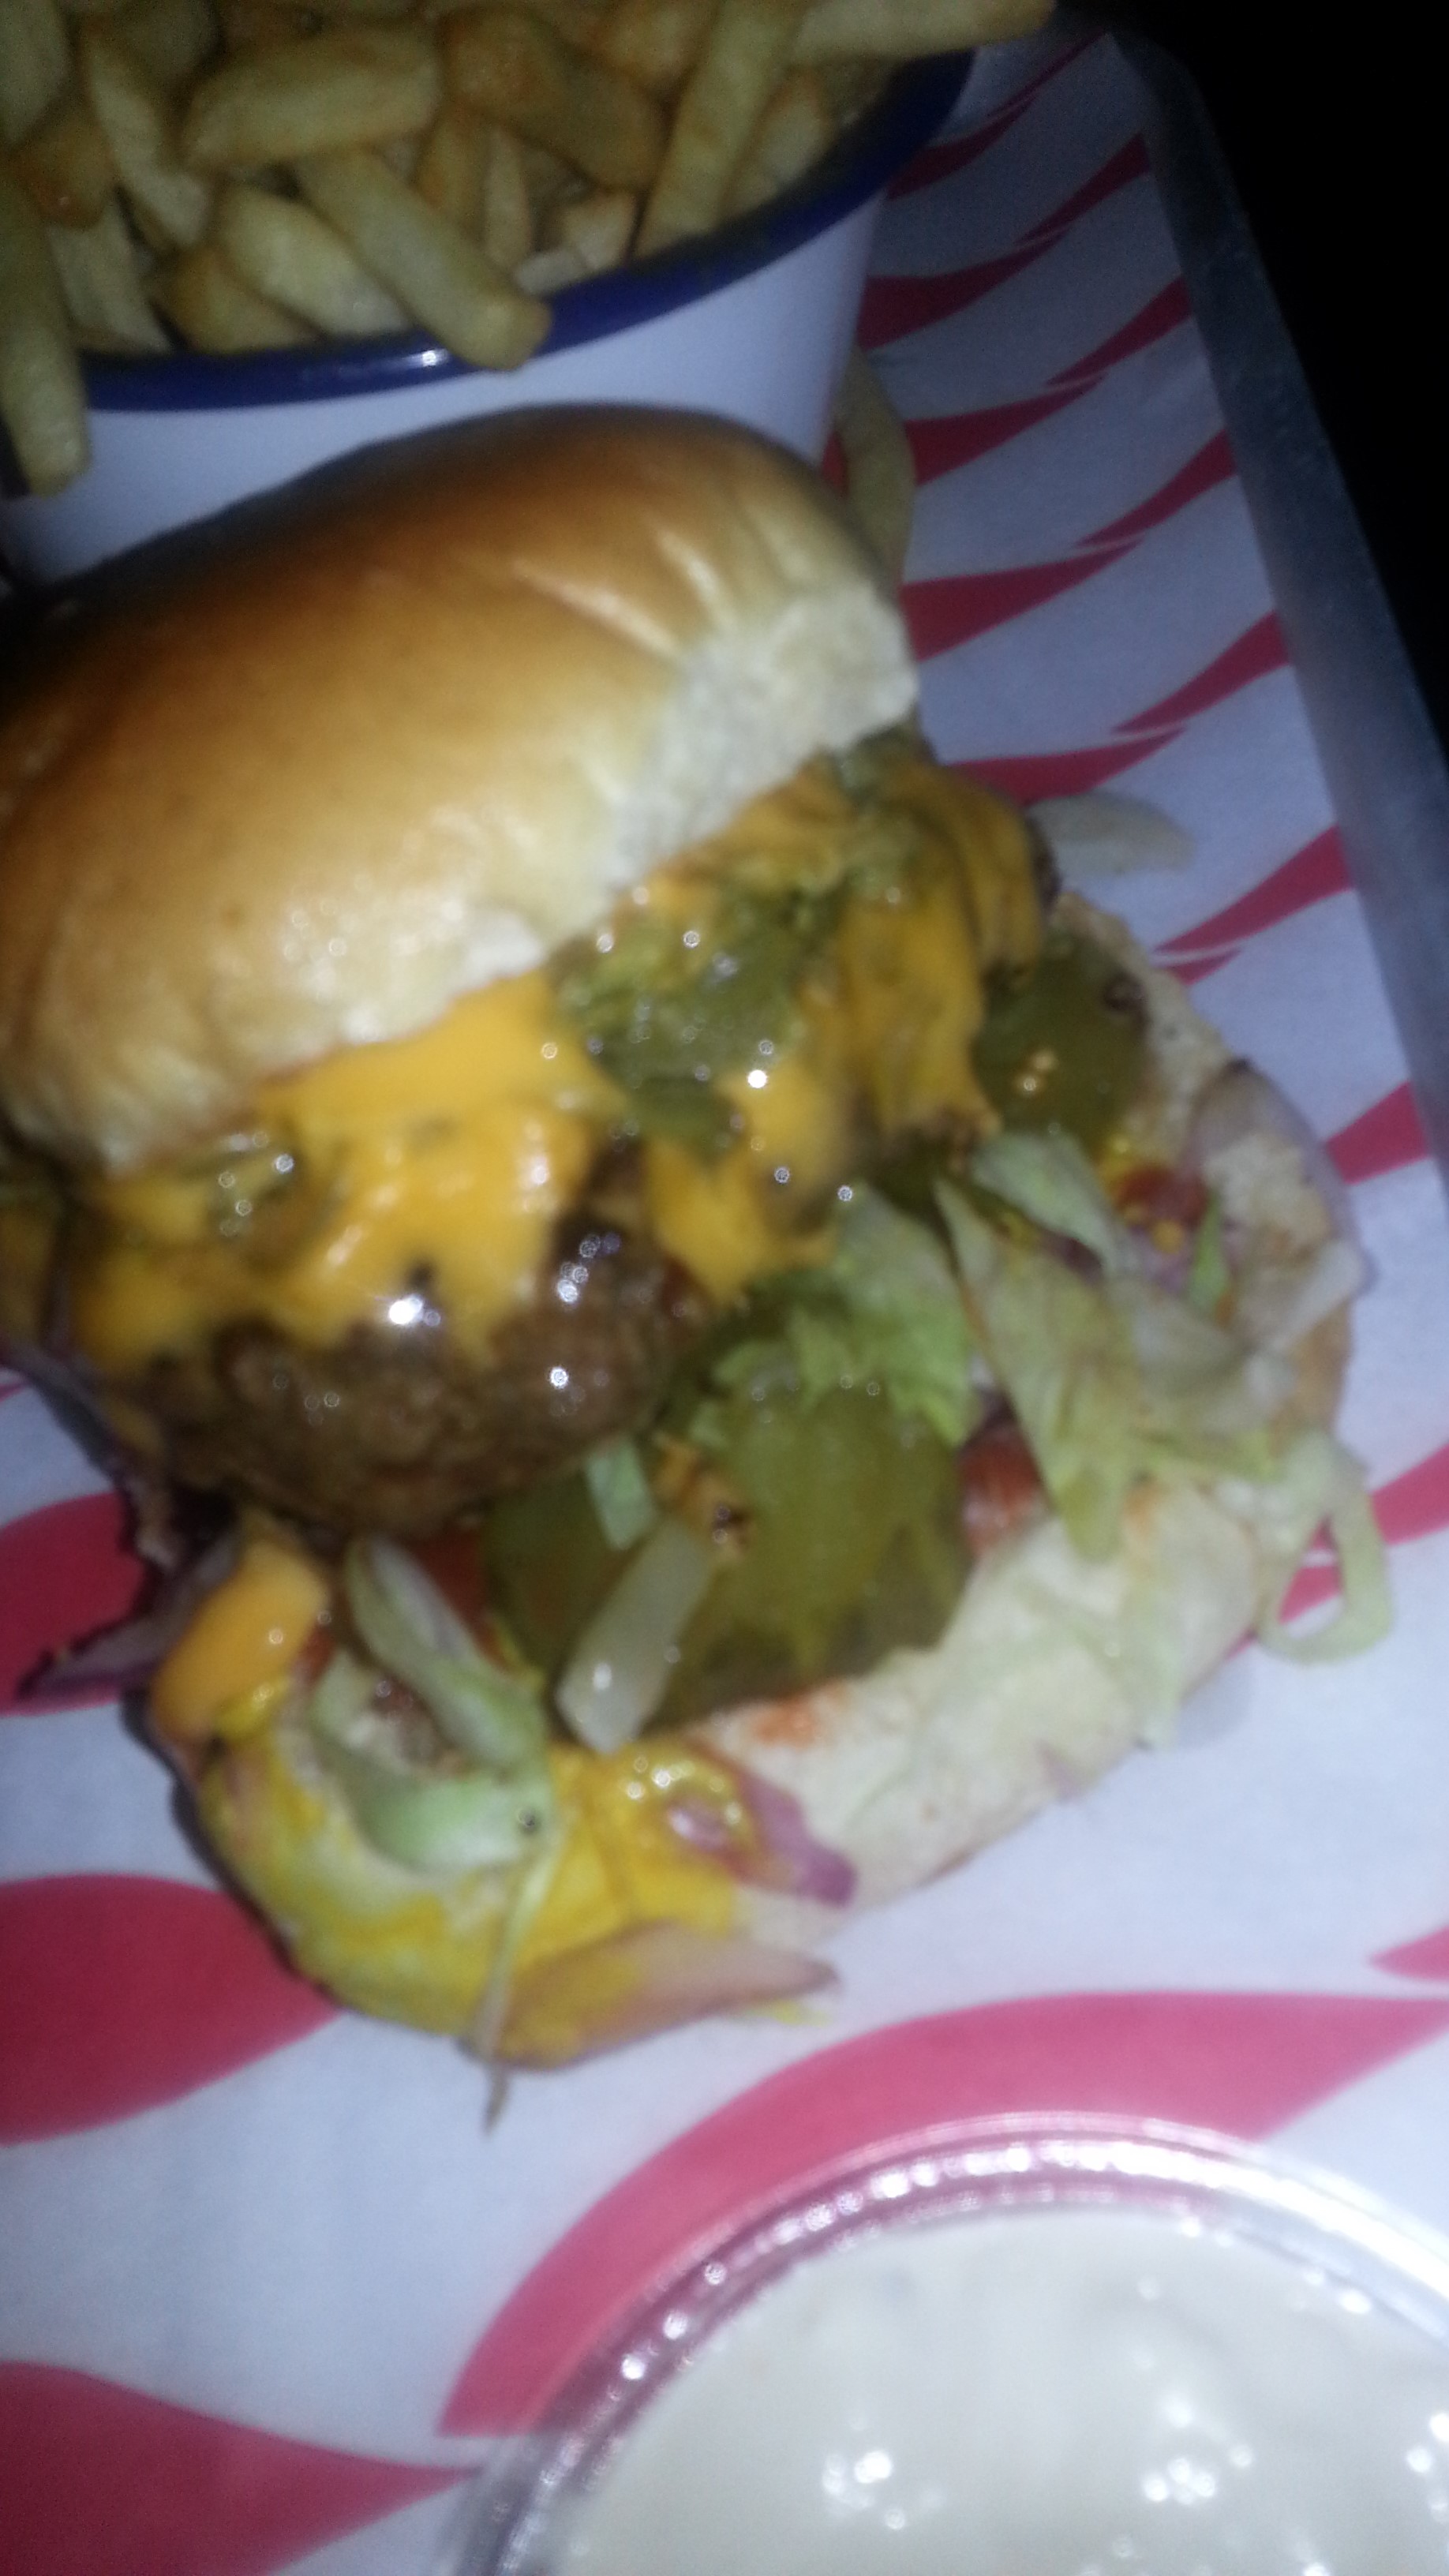 #RedRawClub does burgers at Meat Liquor